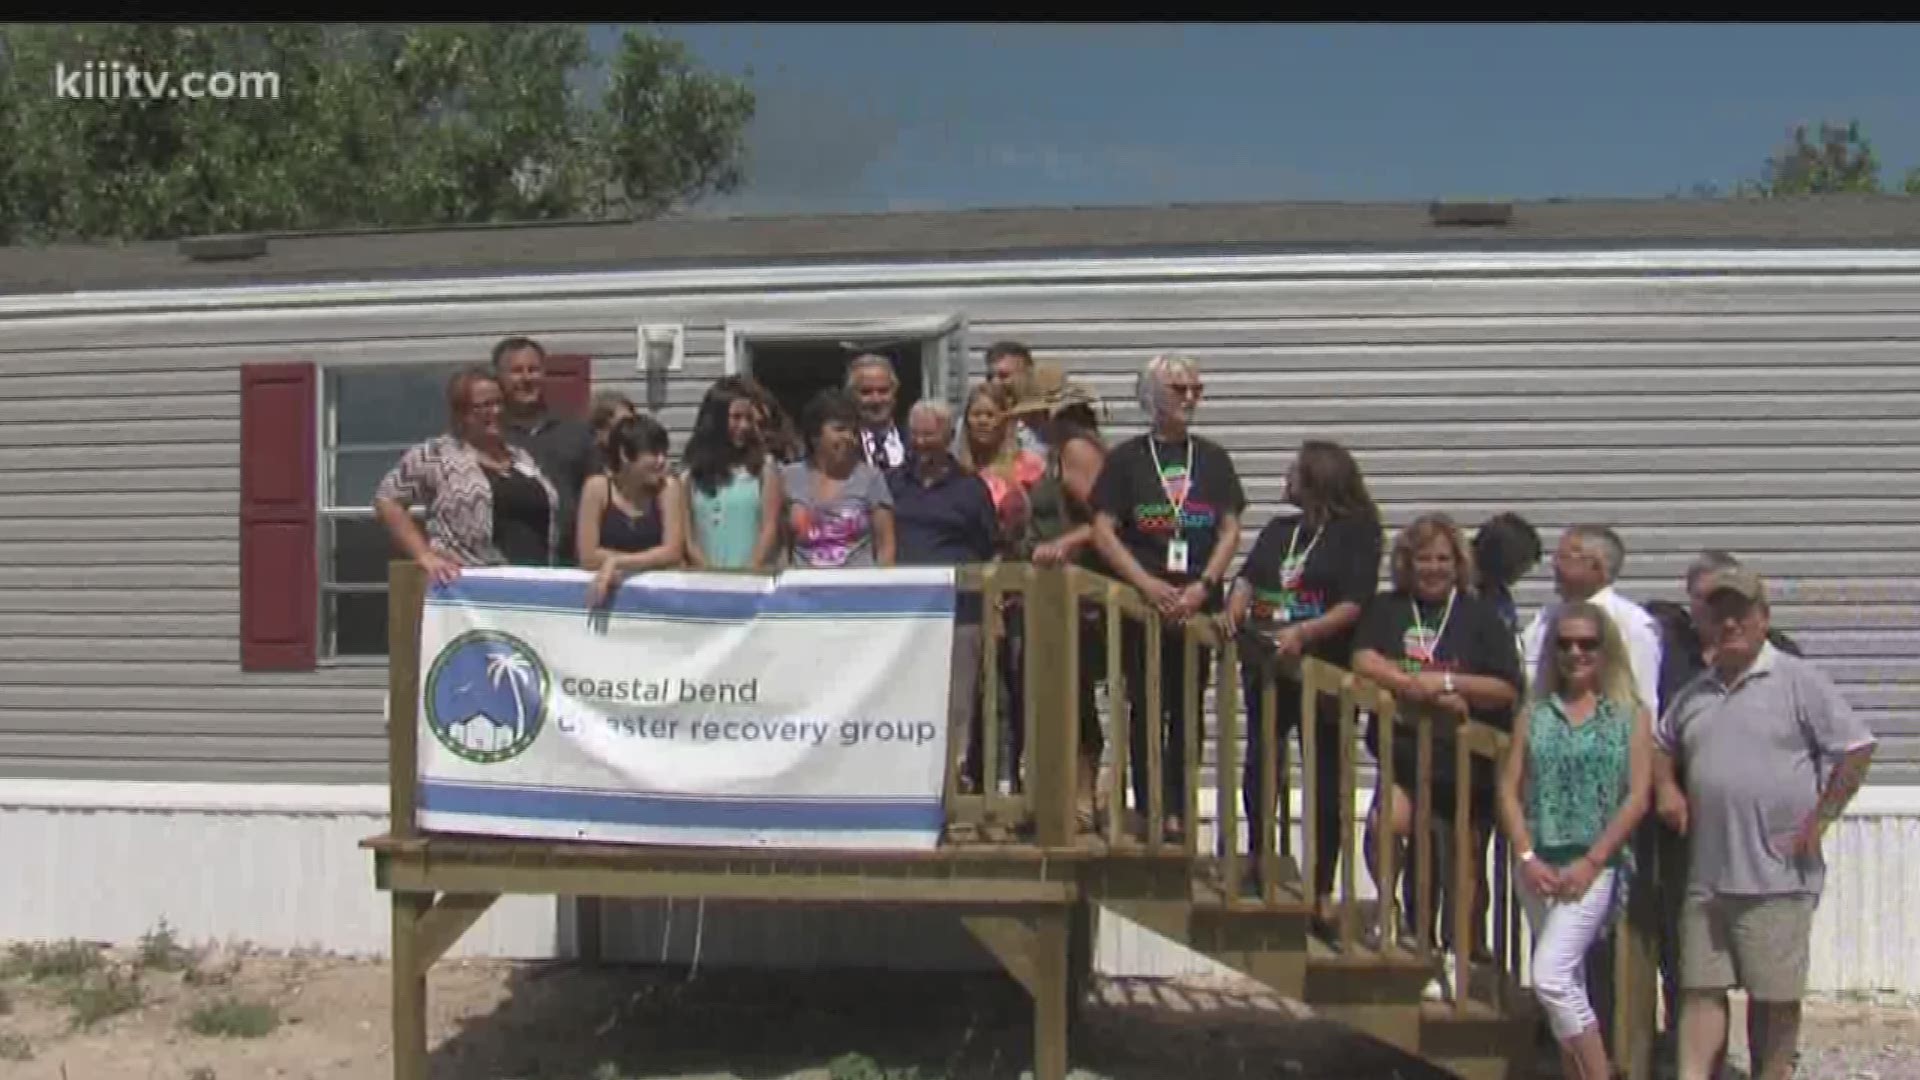 Jannet Bardwell and her family received a brand new manufactured home from the Coastal Bend Disaster Recovery Group.